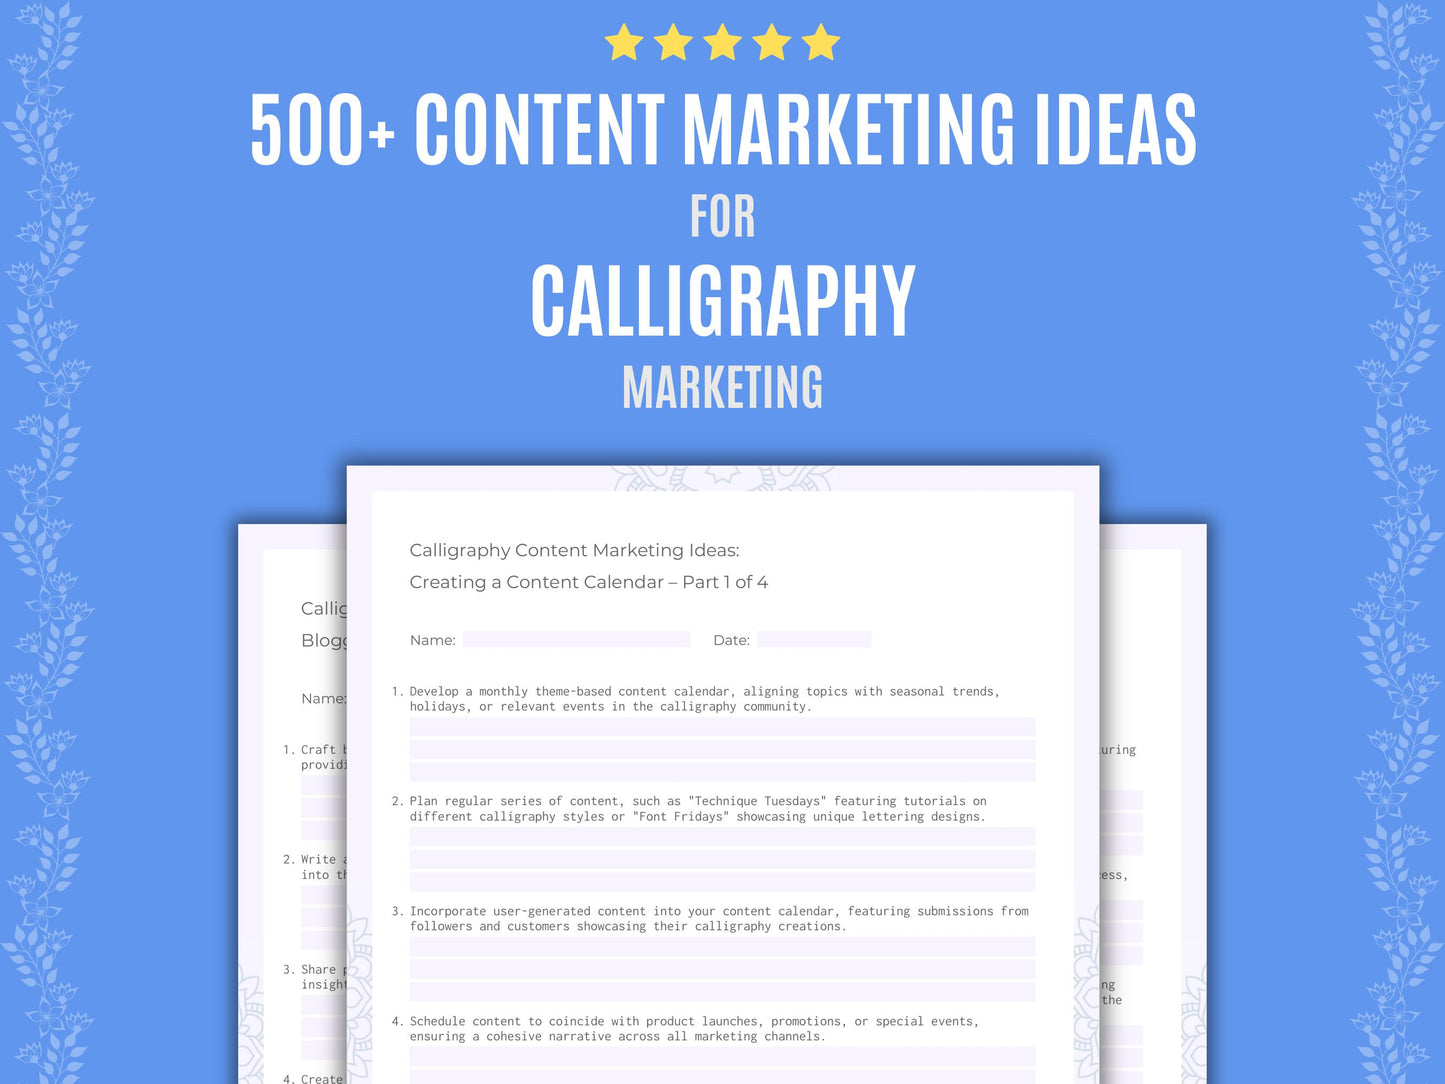 Calligraphy Content Marketing Ideas Resource